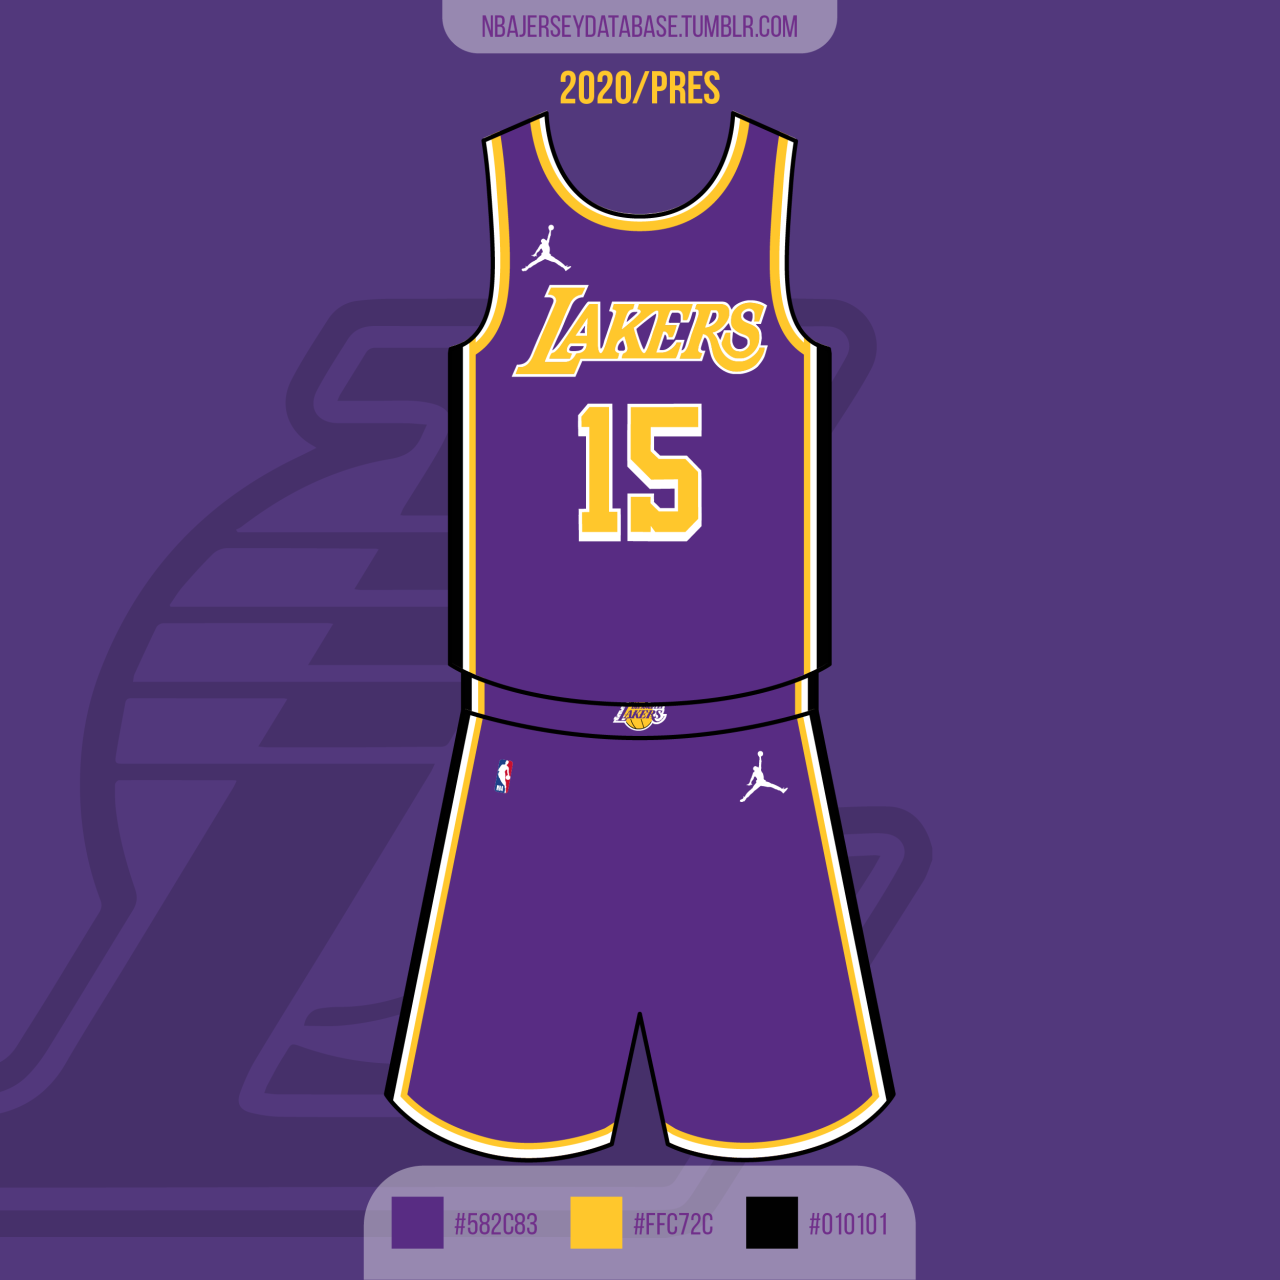 lakers statement jersey 2020